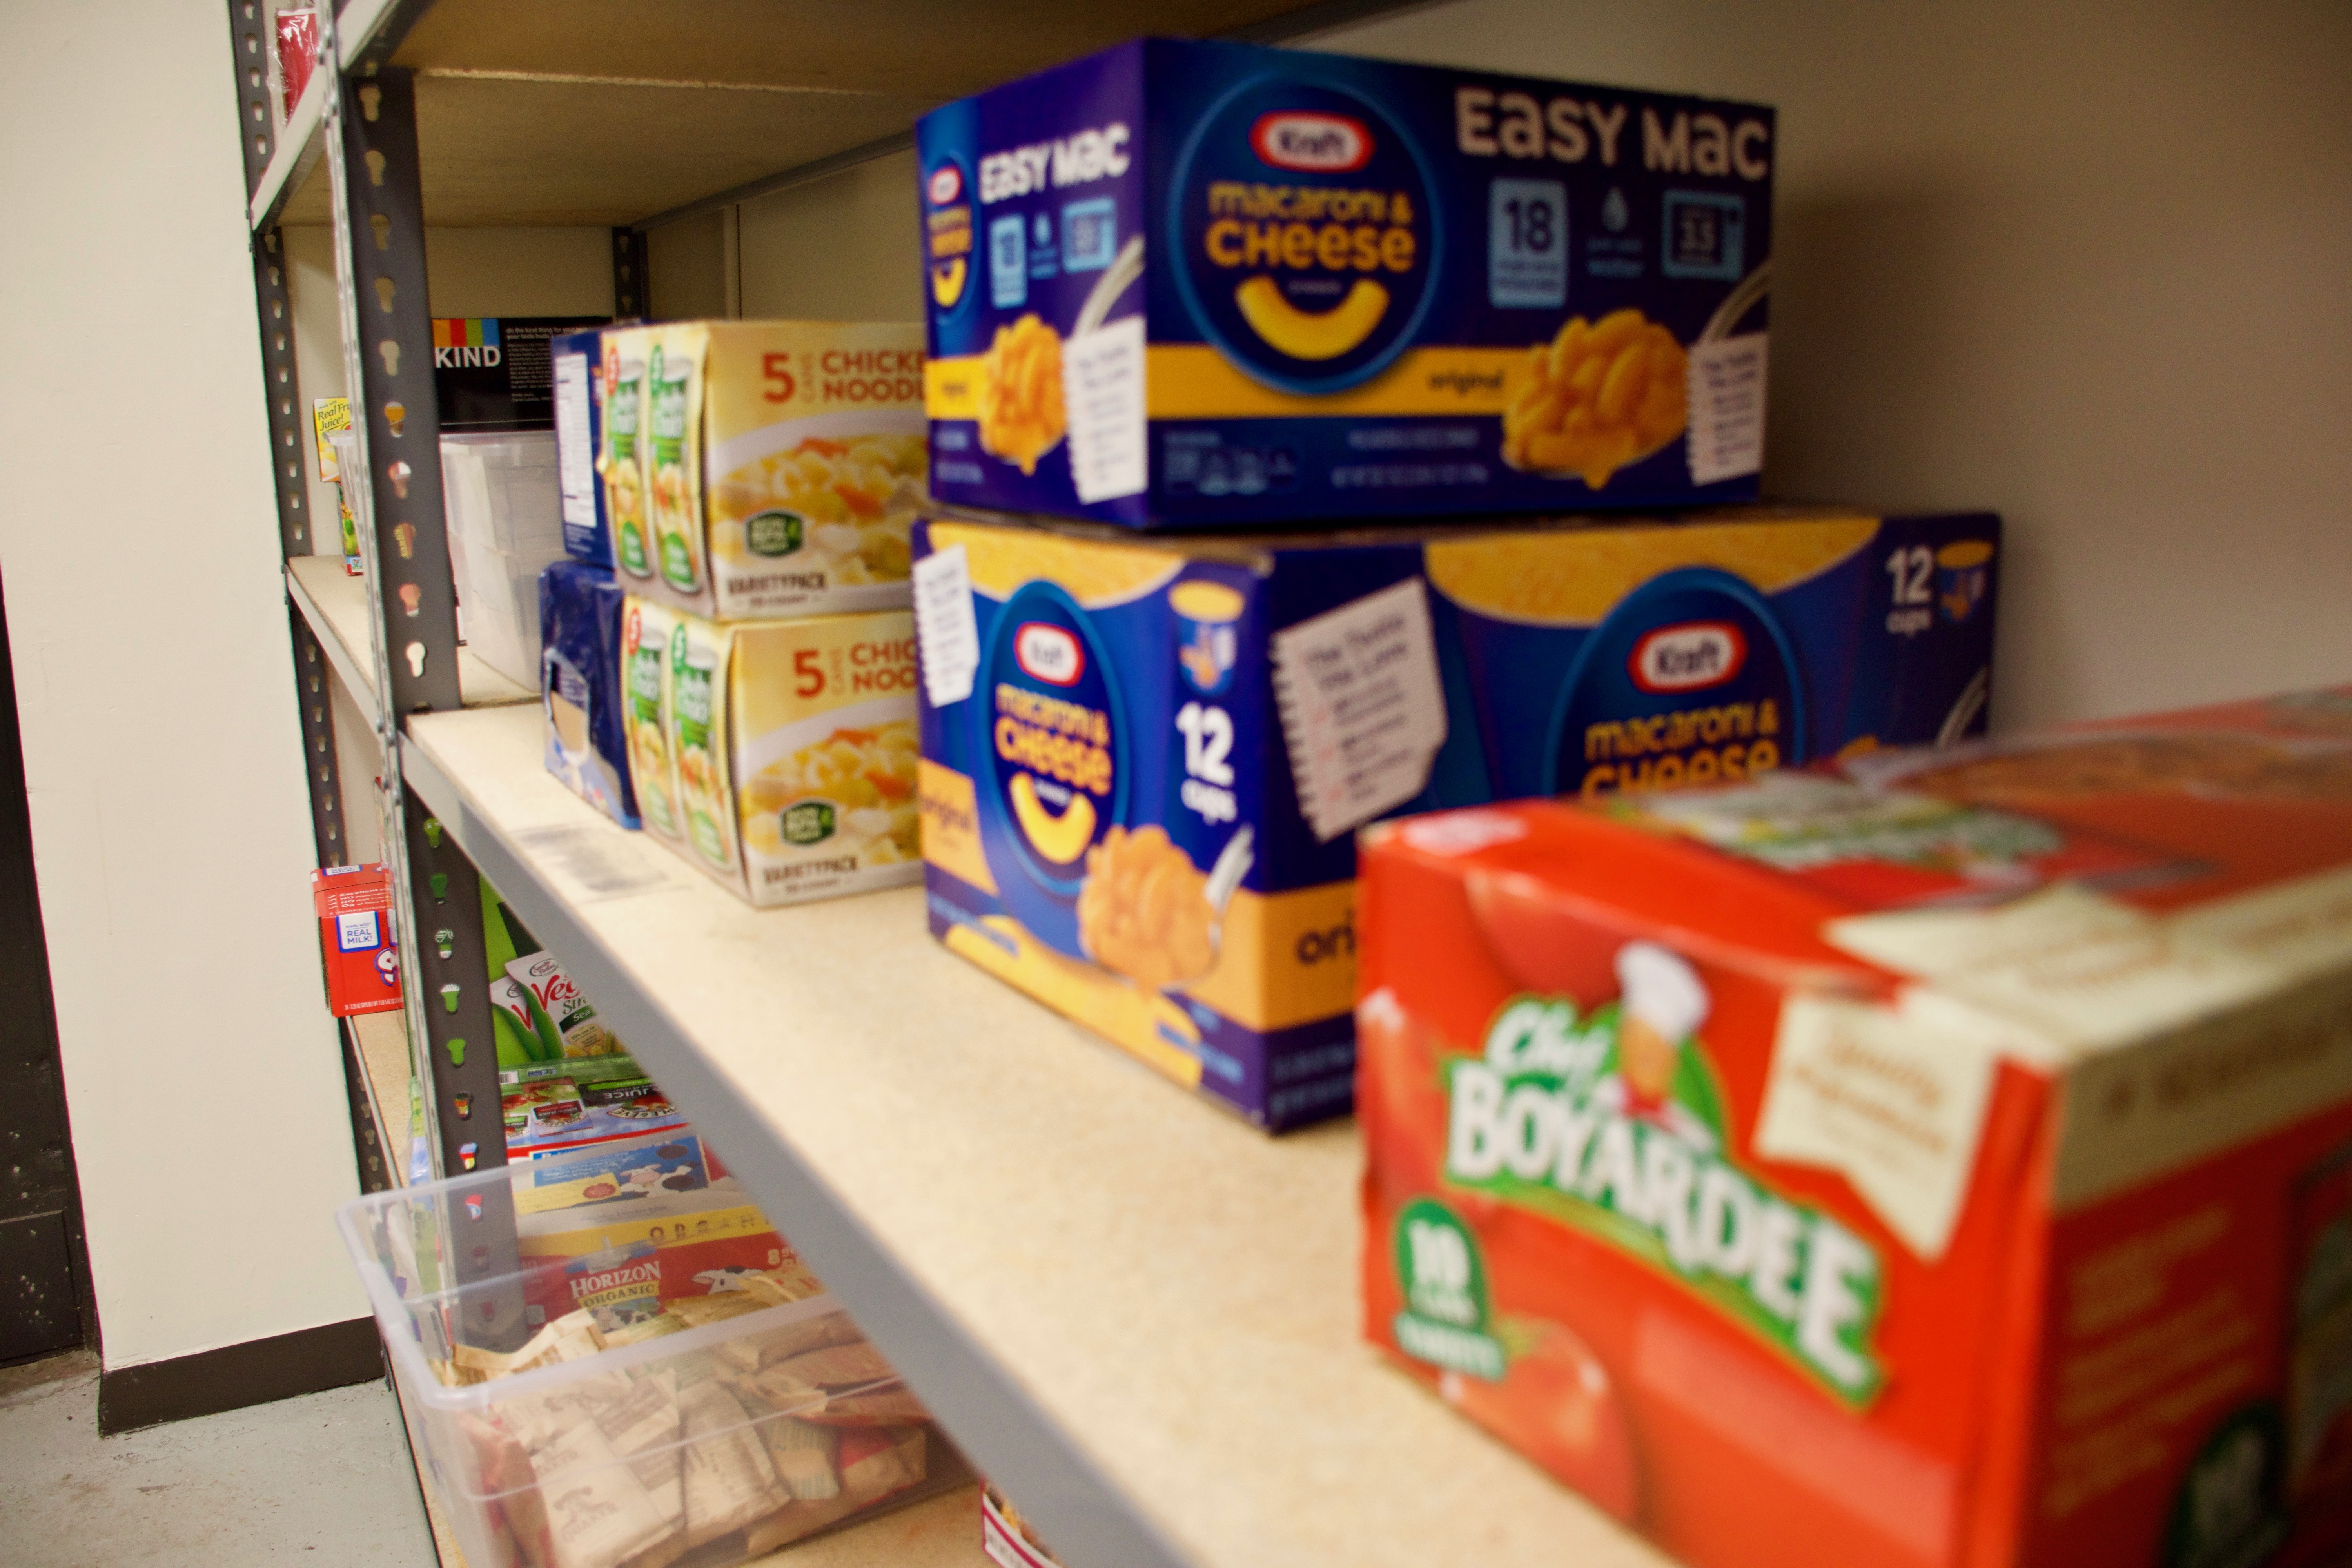 A set of shelves with macaroni and cheese and noodles stacked up on top of one another in a food pantry.